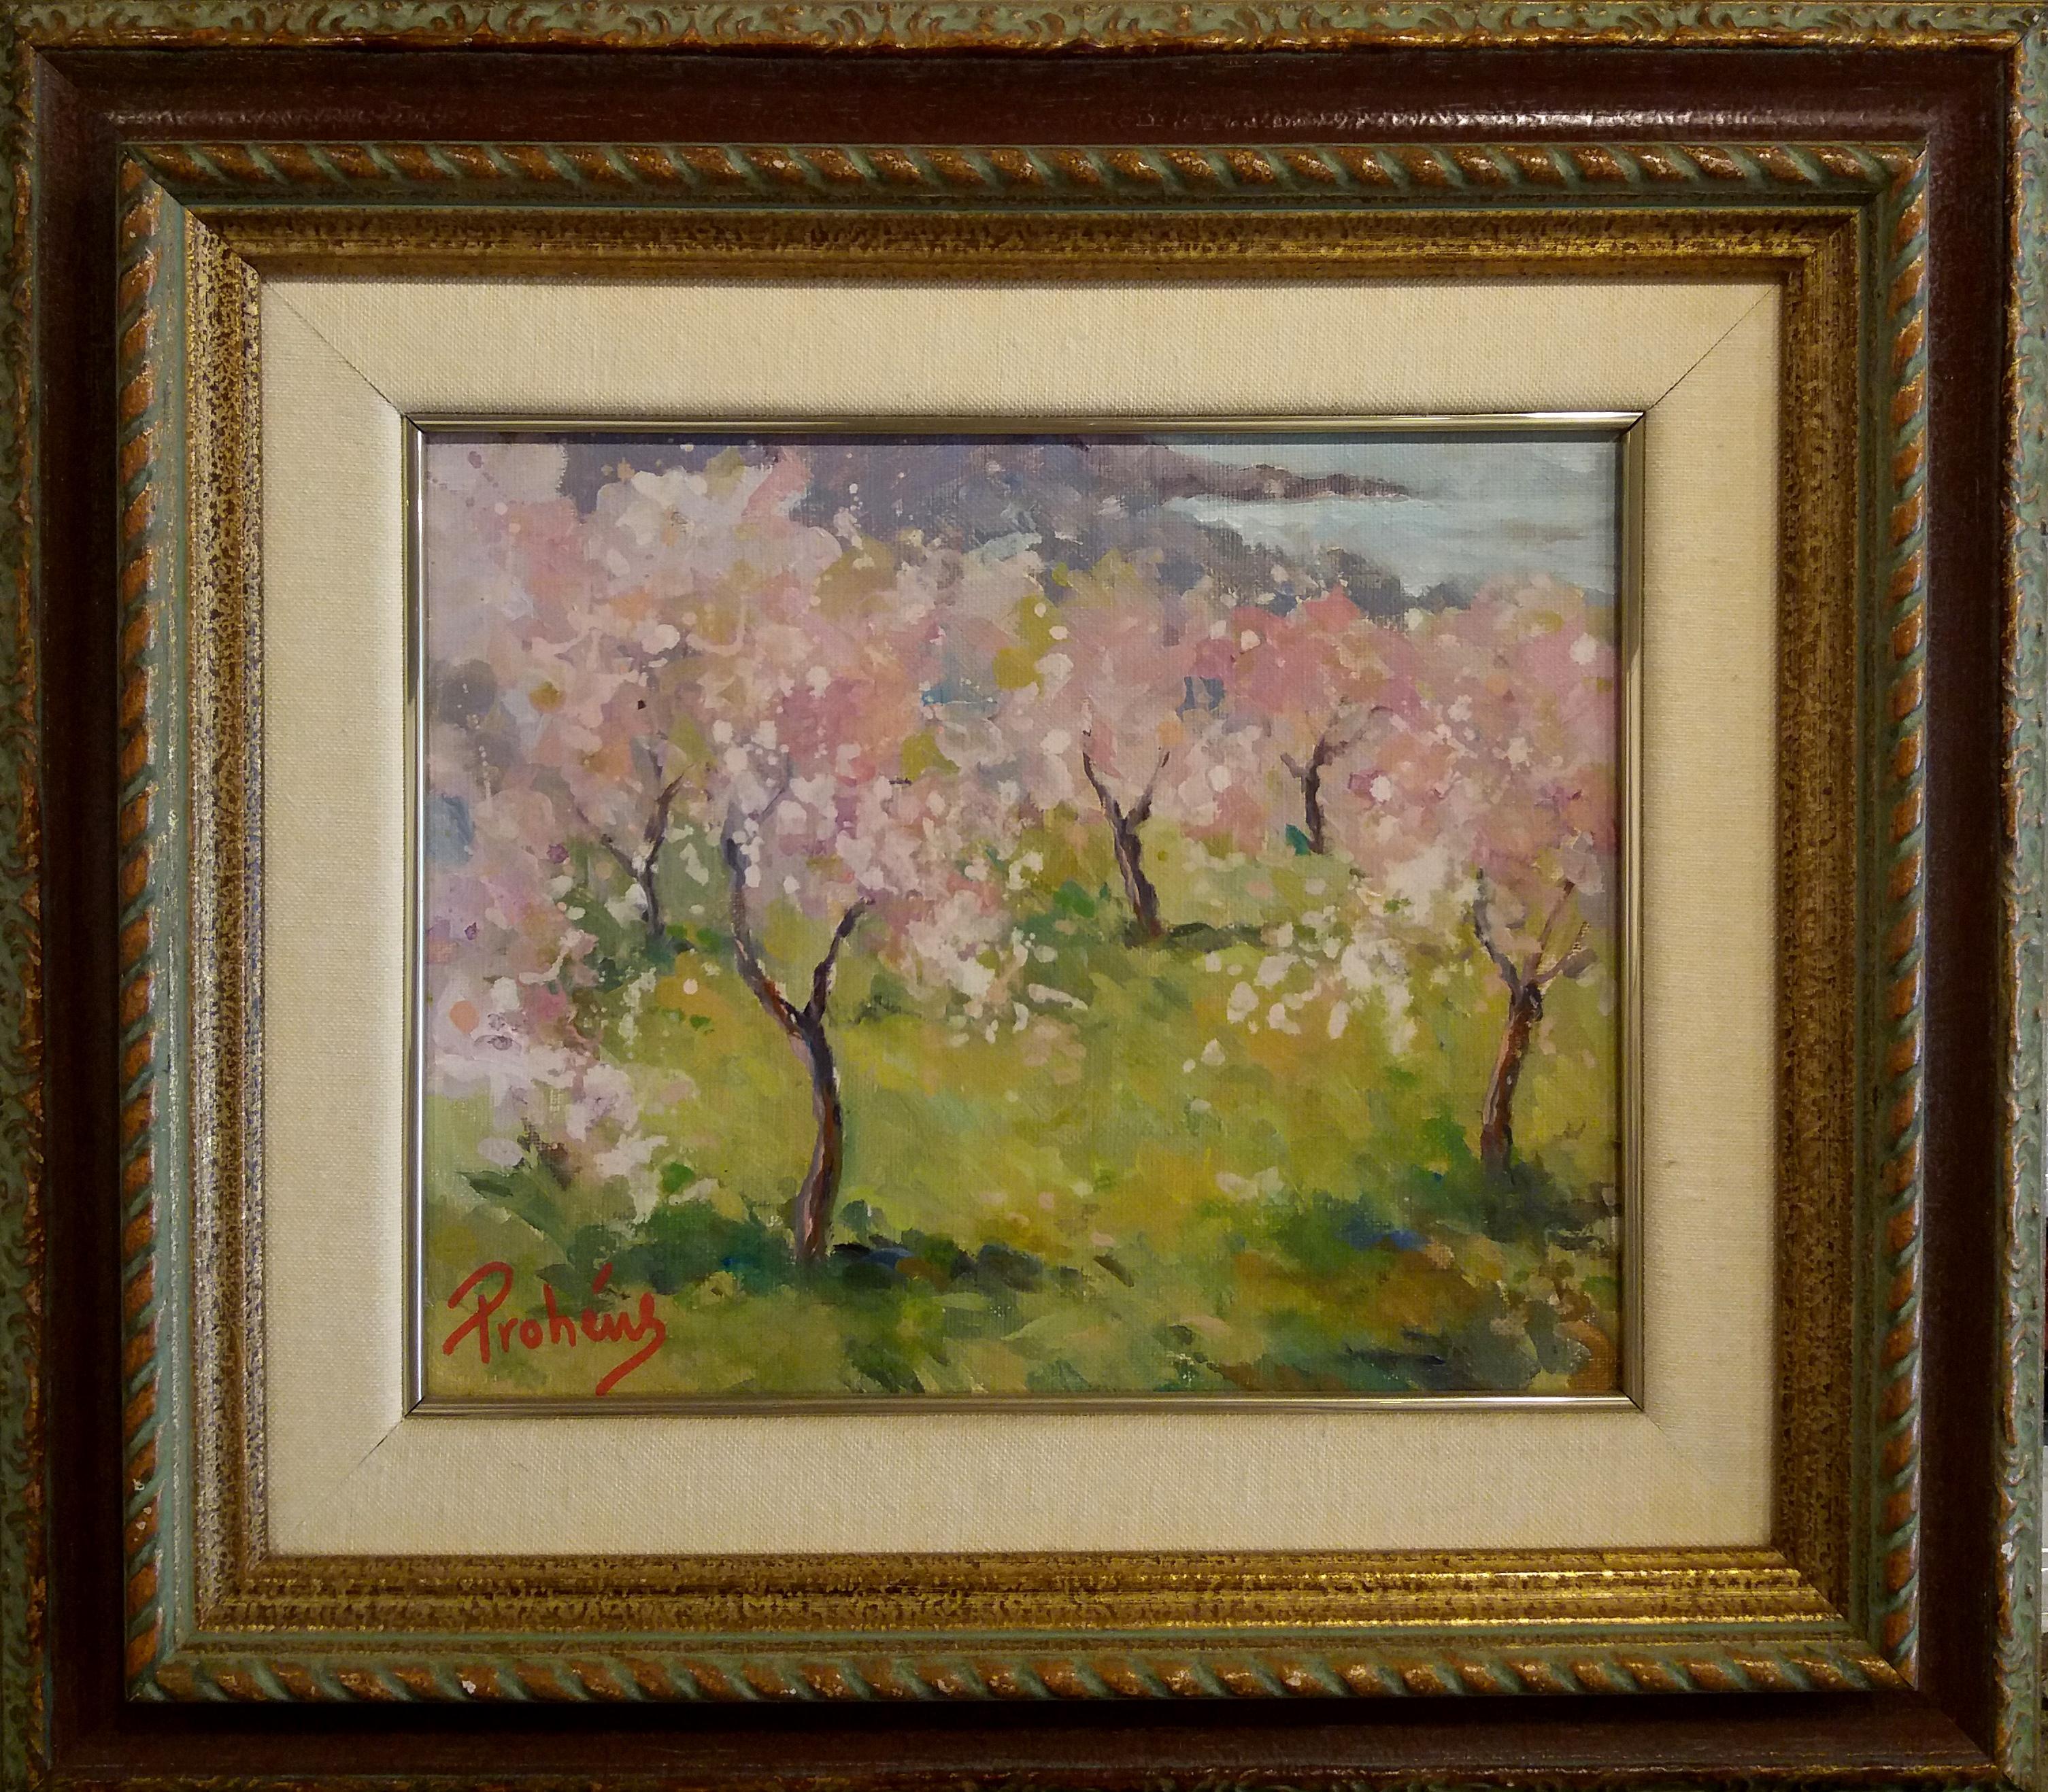 Onofre Prohens Landscape Painting - Prohens  Almond Blossom Mallorca. original acrylic painting